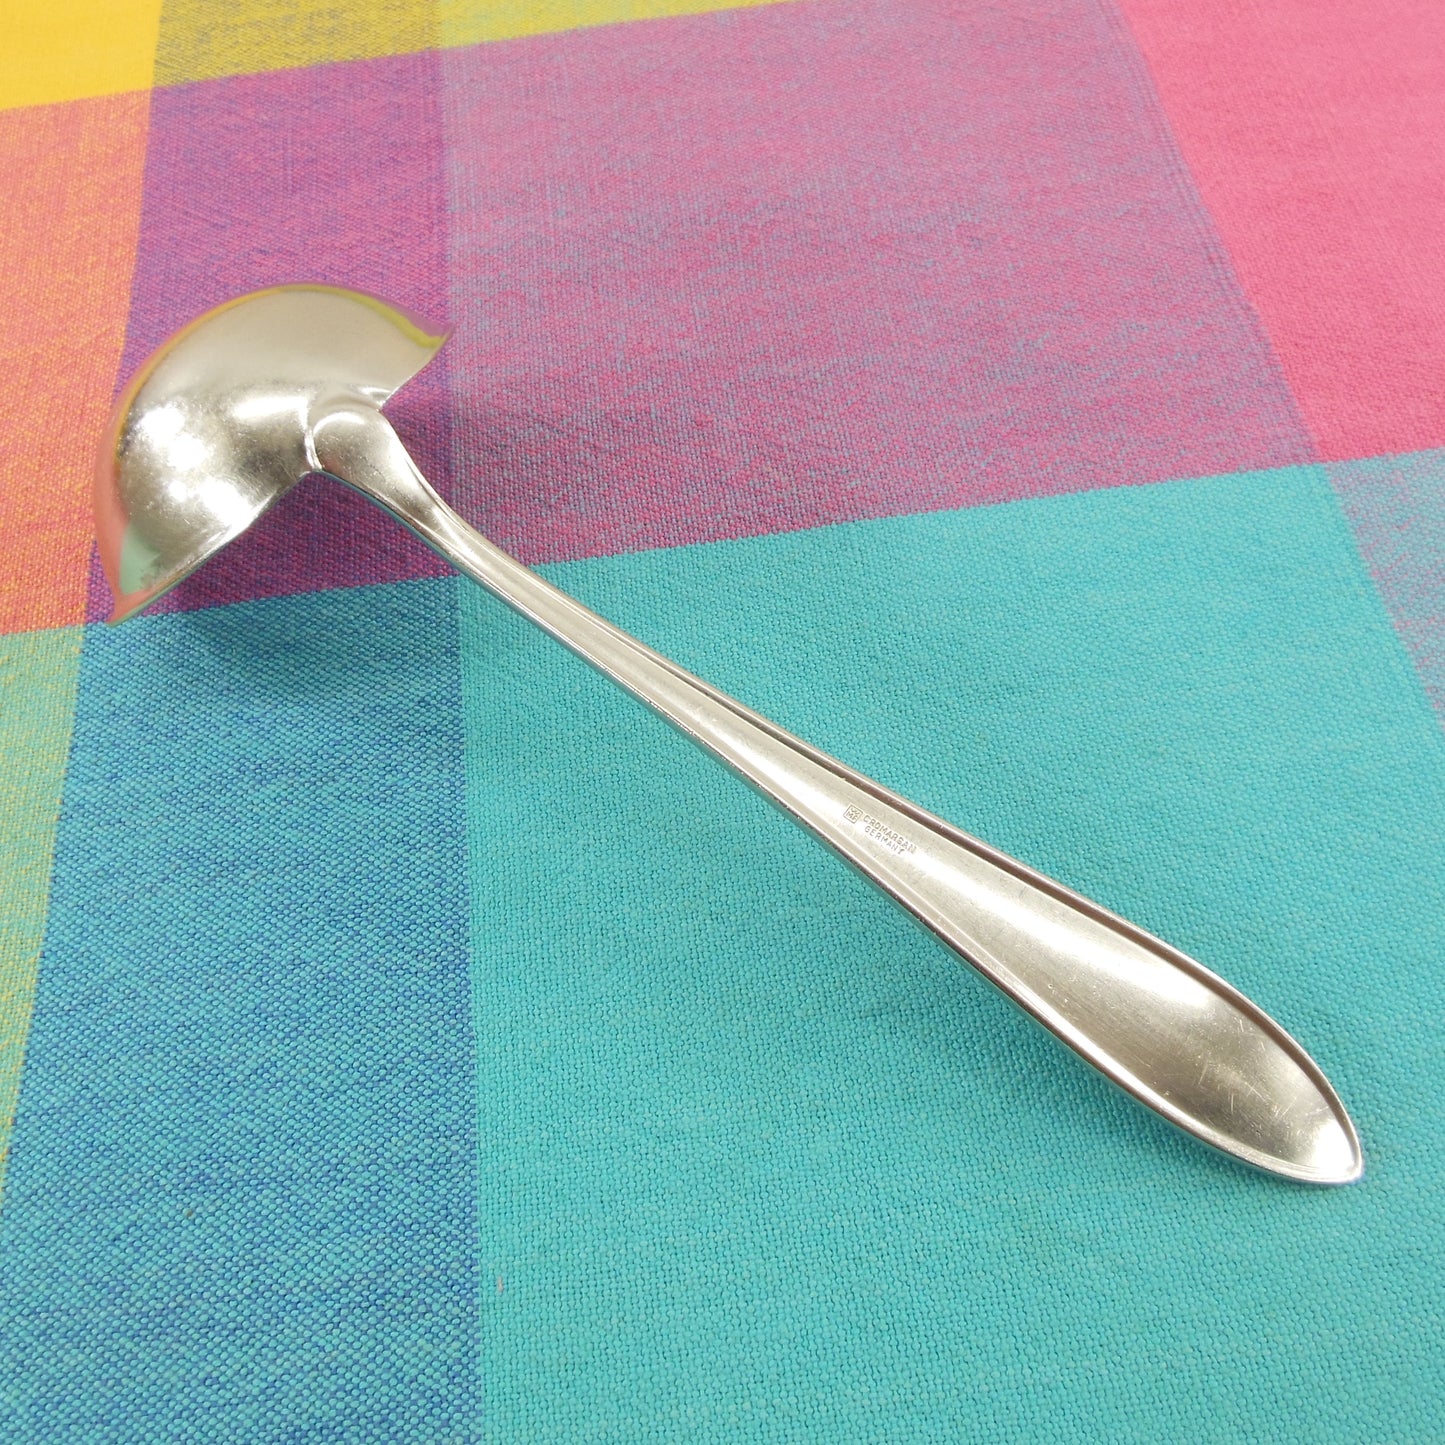 WMF Cromargan Germany Shadowpoint Stainless Gravy Ladle Vintage